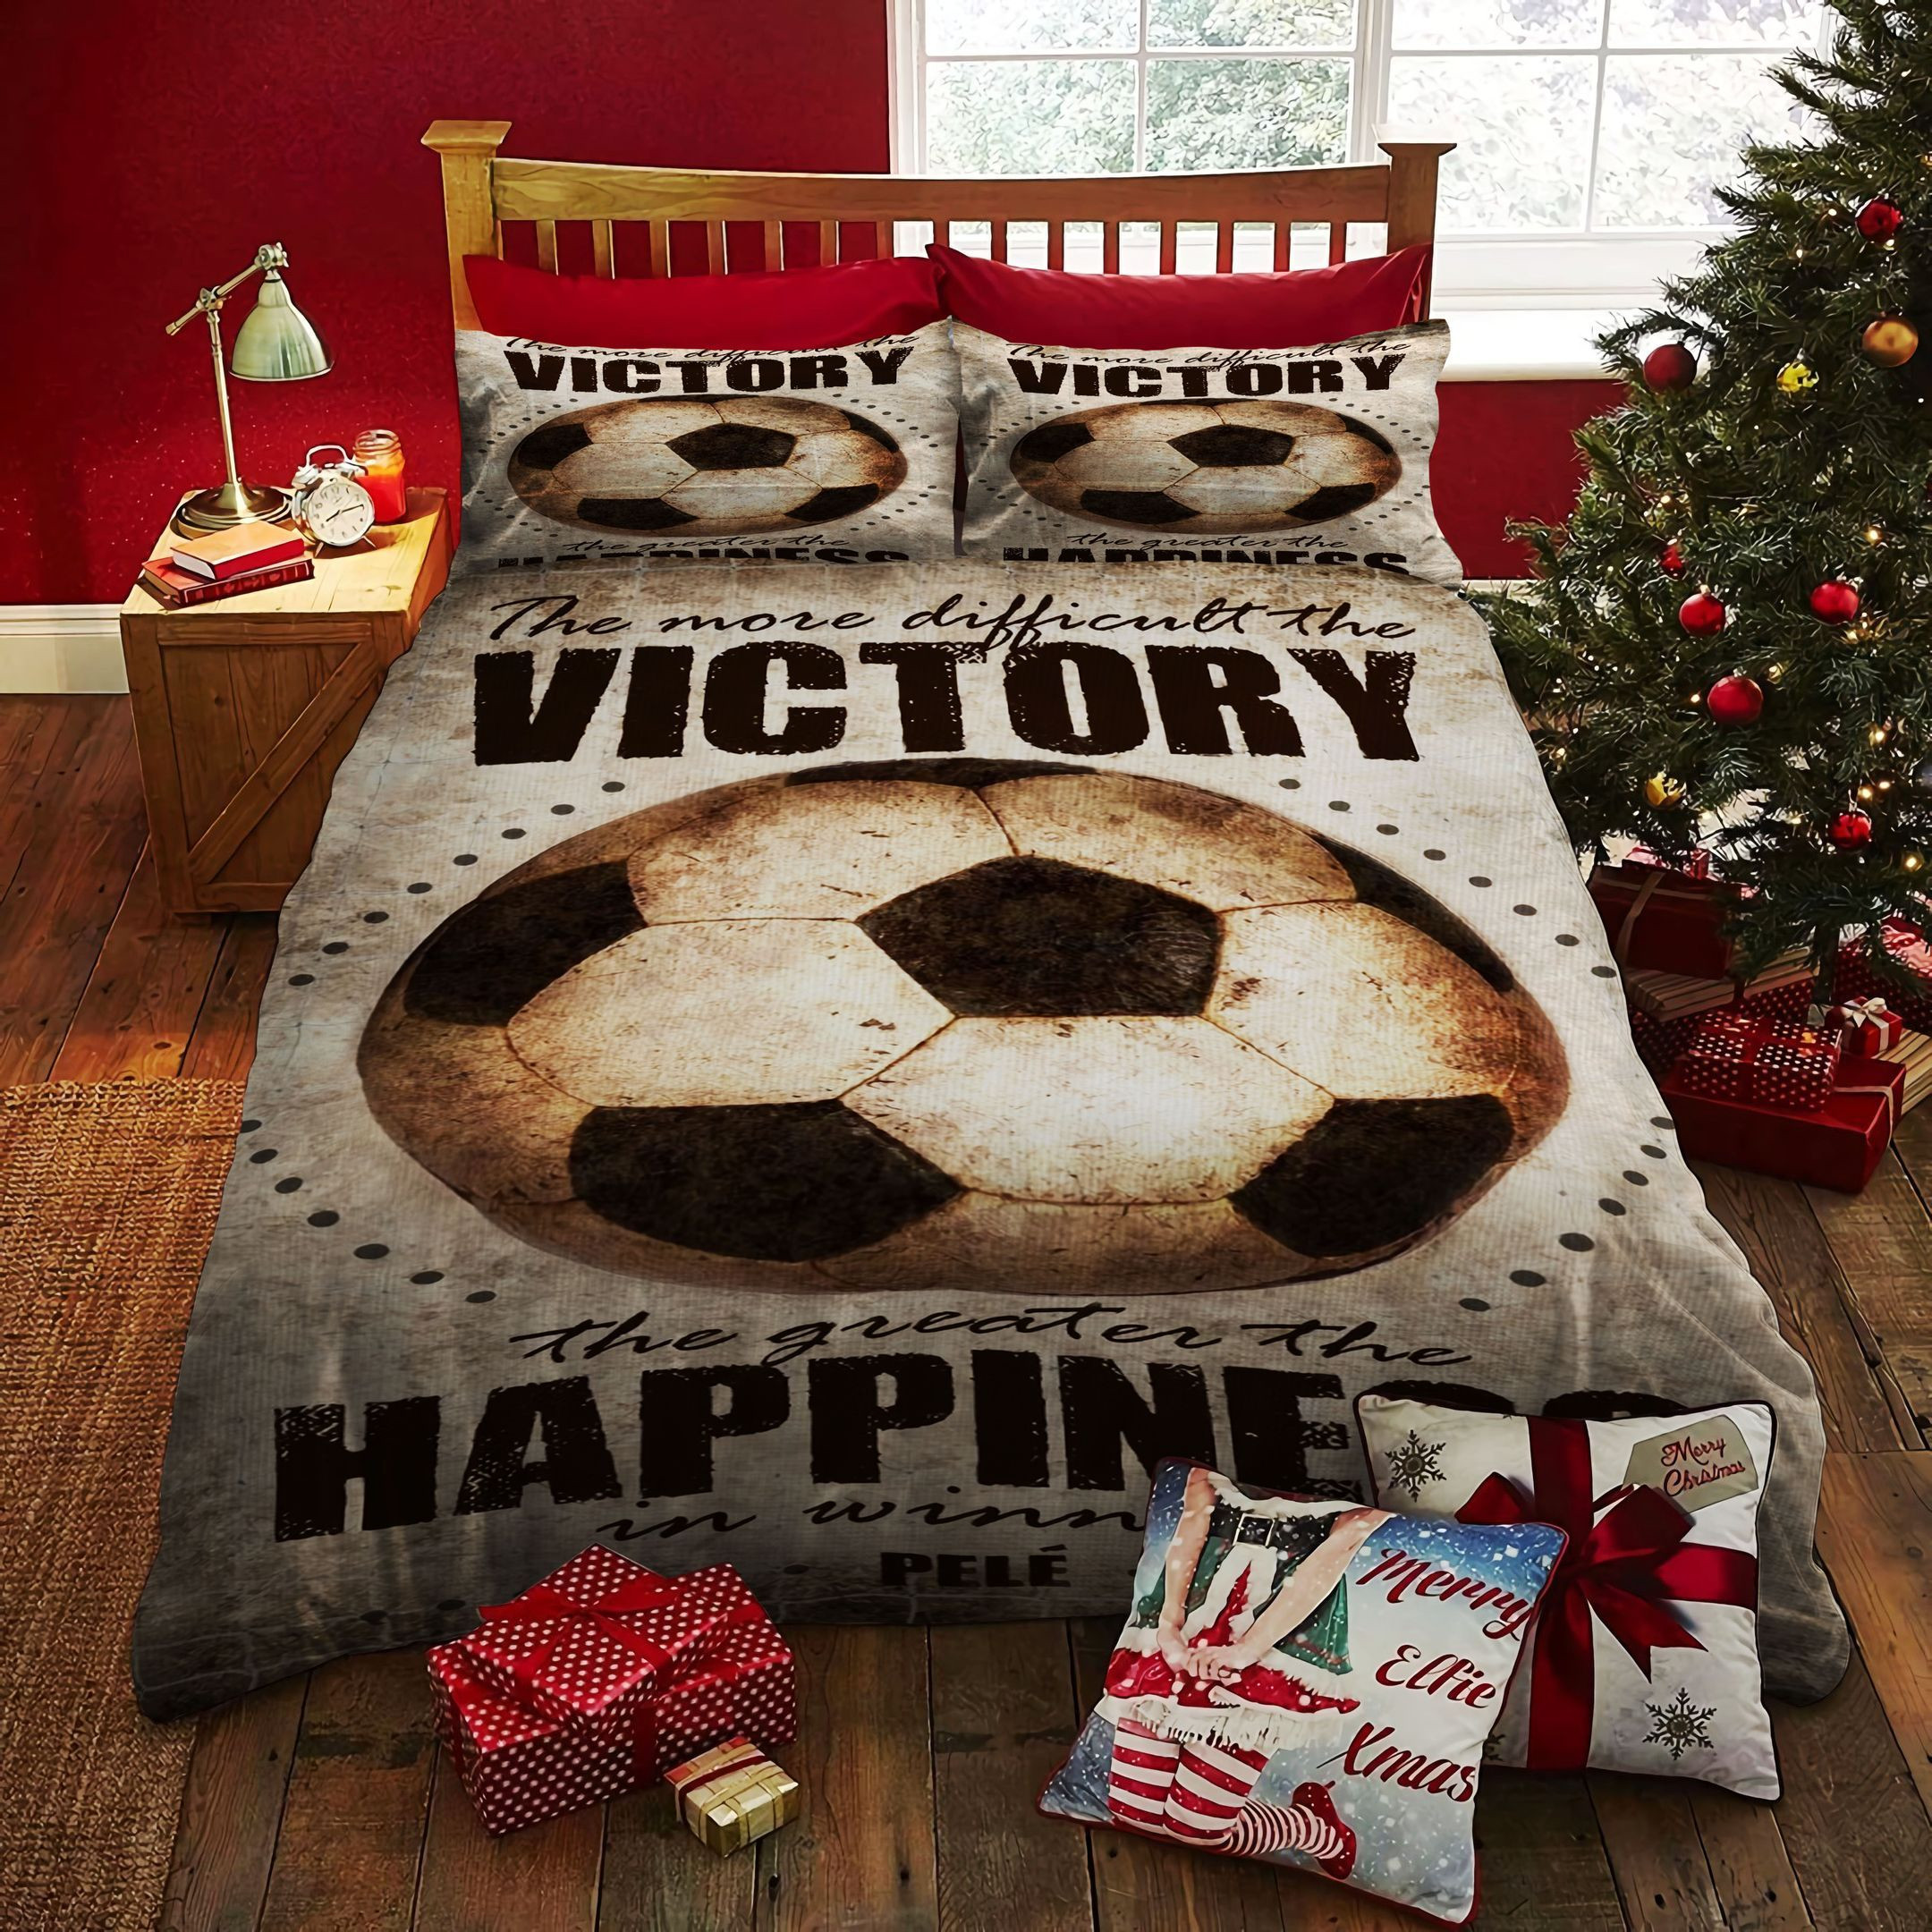 retro football bed linens quilt cover bed set ideal presents for birthdays holidays husfm